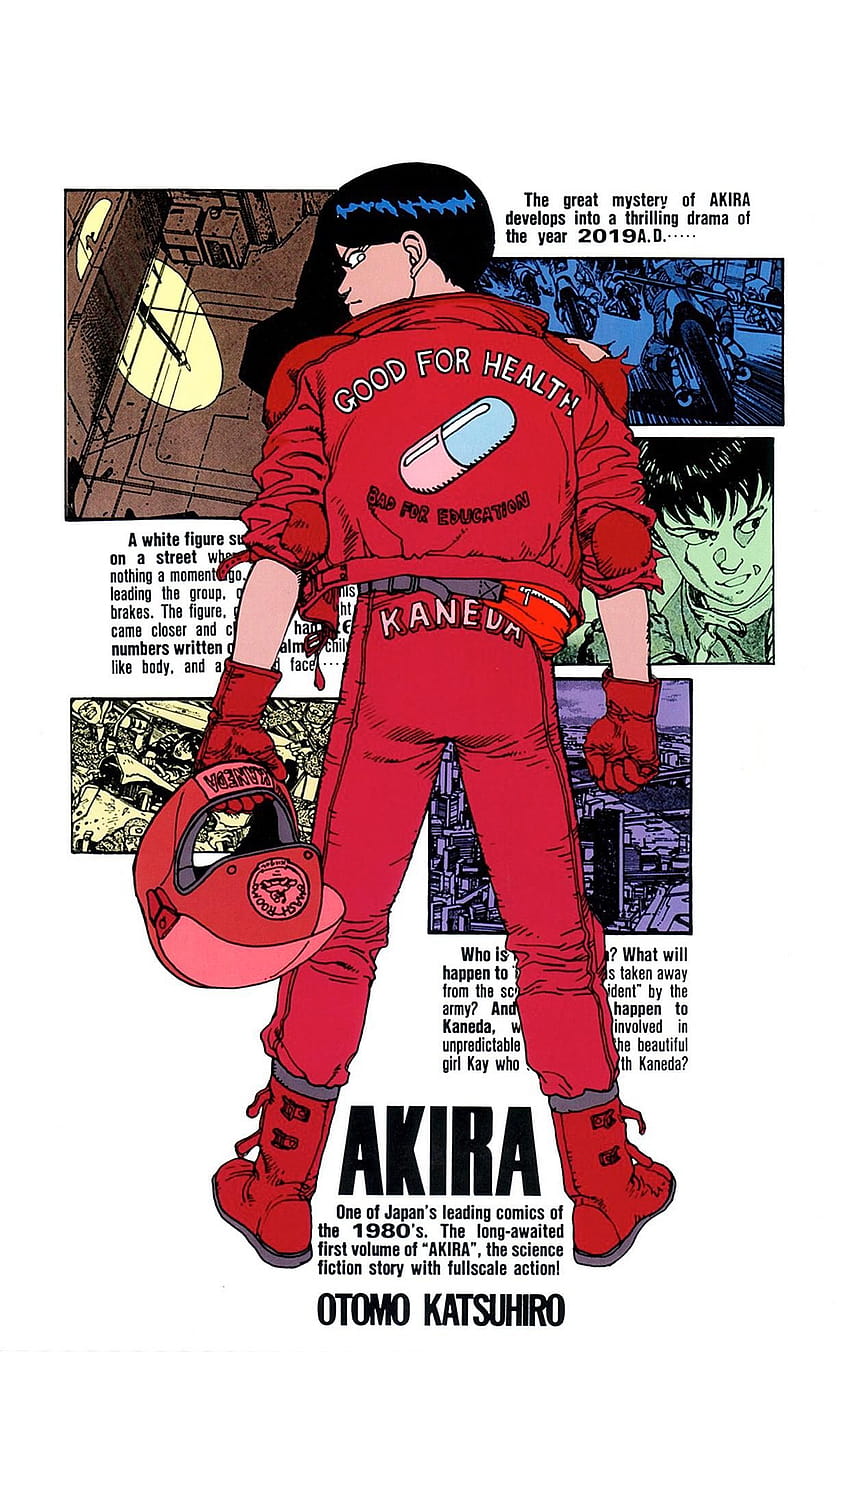 Anime Classic AKIRA Returns on 4K UHD Bluray January 18th From Funimation   We Are Movie Geeks